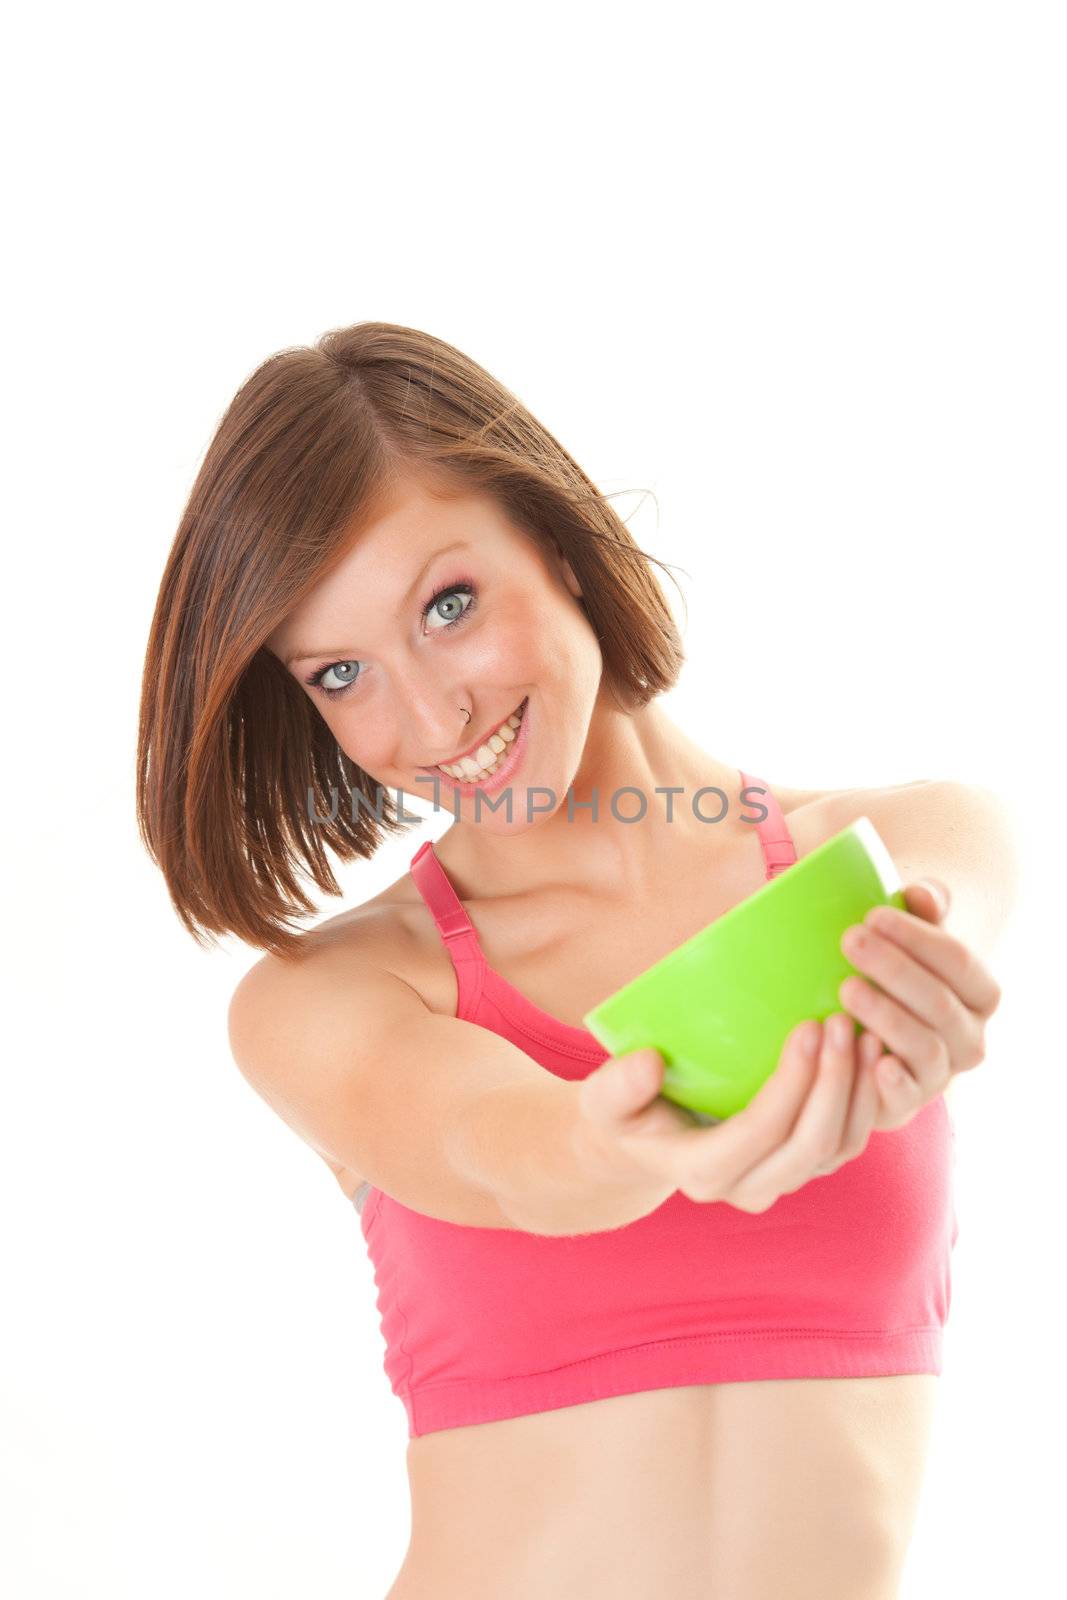 young beautiful sport woman laughing with a bowl isolated on white background